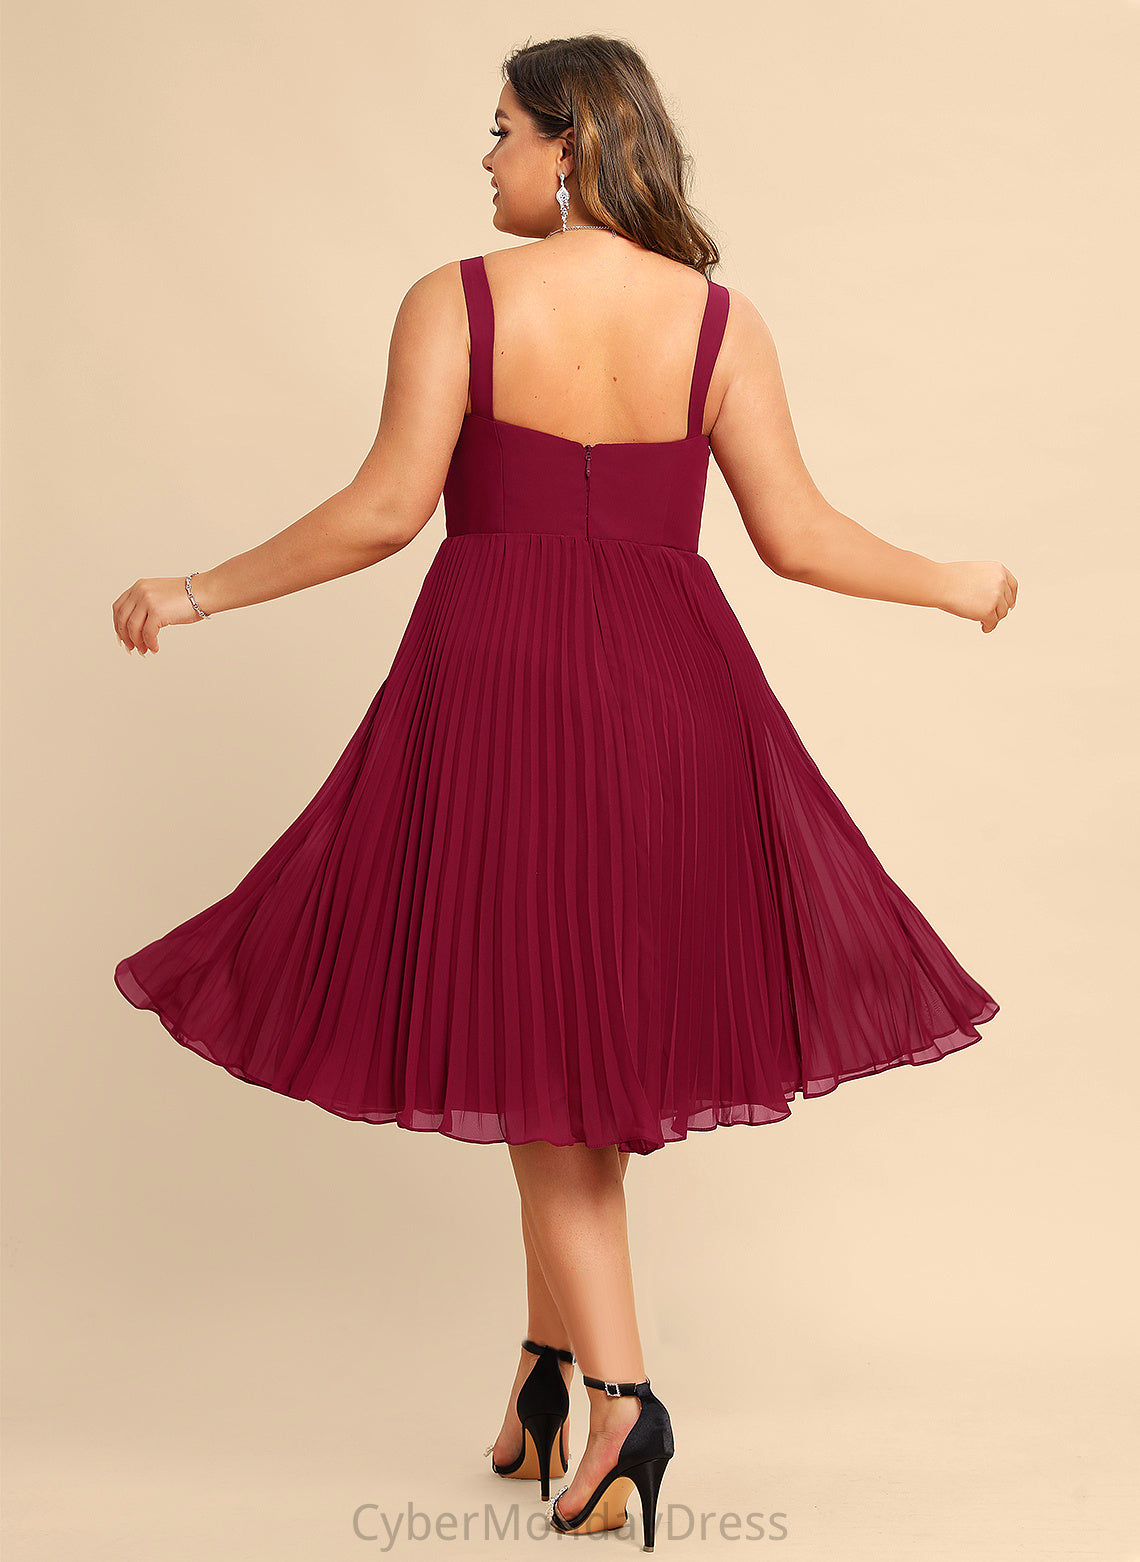 Cocktail Dresses Cocktail Chiffon With Philippa Dress Knee-Length Square Pleated A-Line Neckline